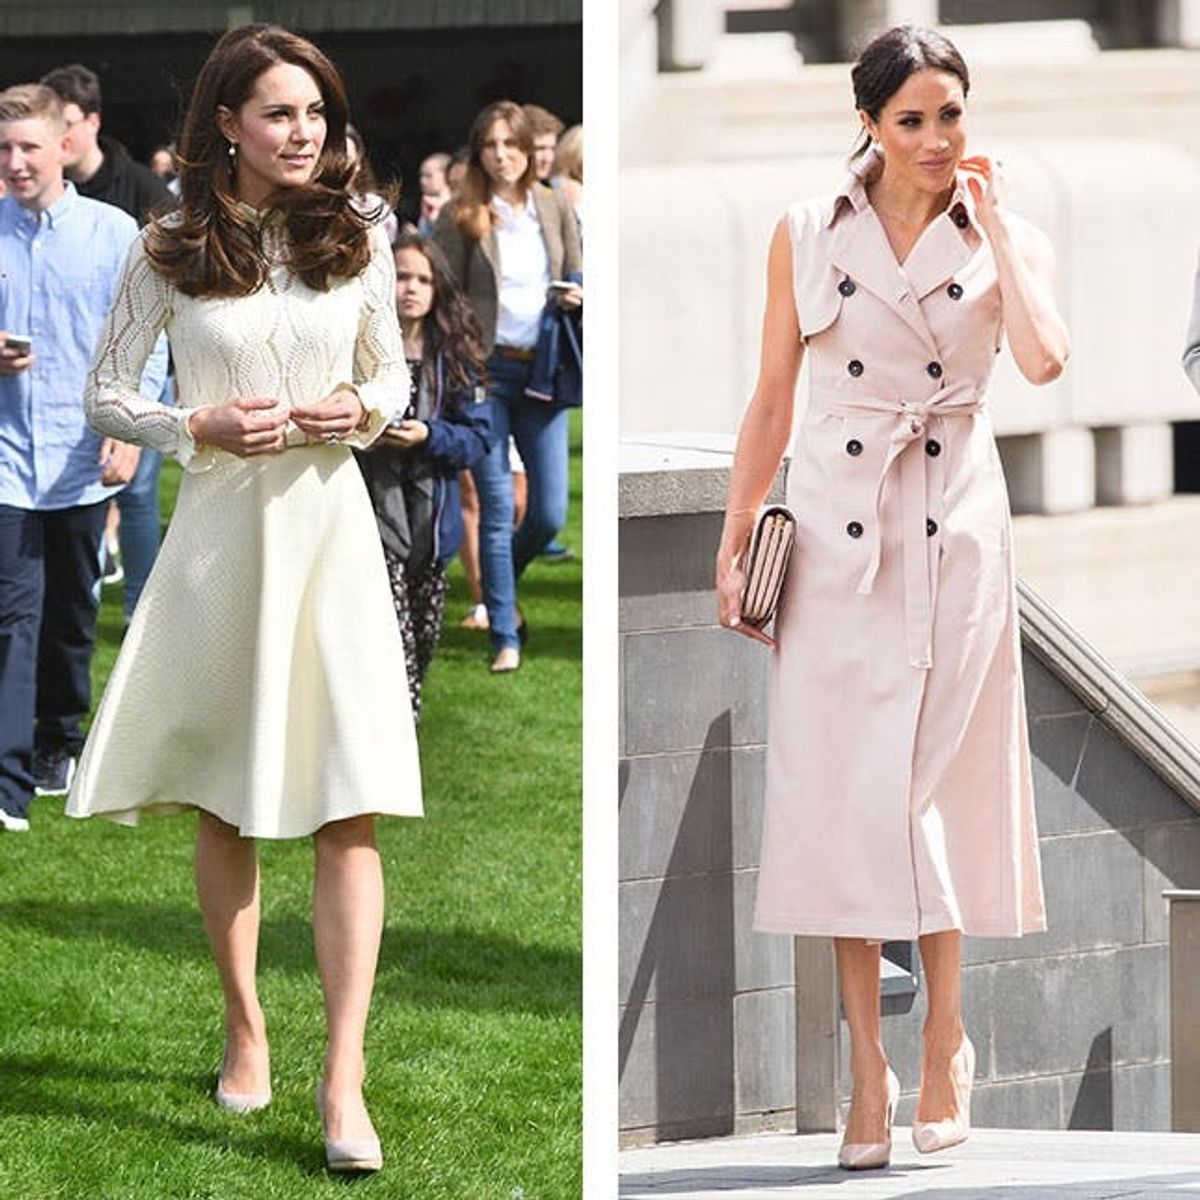 11 Easter Outfit Ideas We’re Stealing from Kate Middleton and Meghan Markle